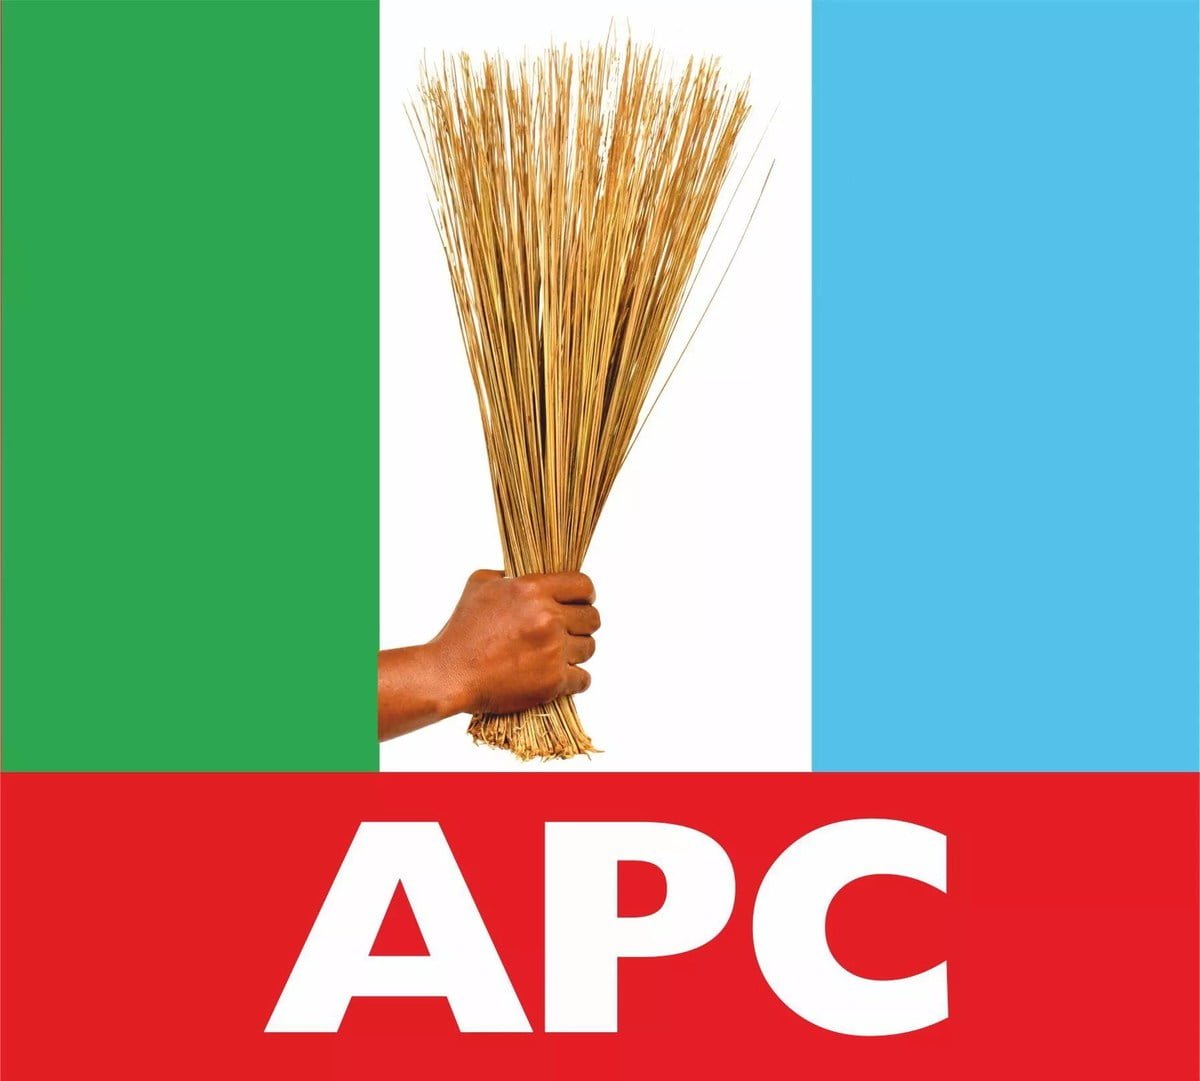 Fayose Is A Chameleon, Always Looking For Attention – APC Fires Back